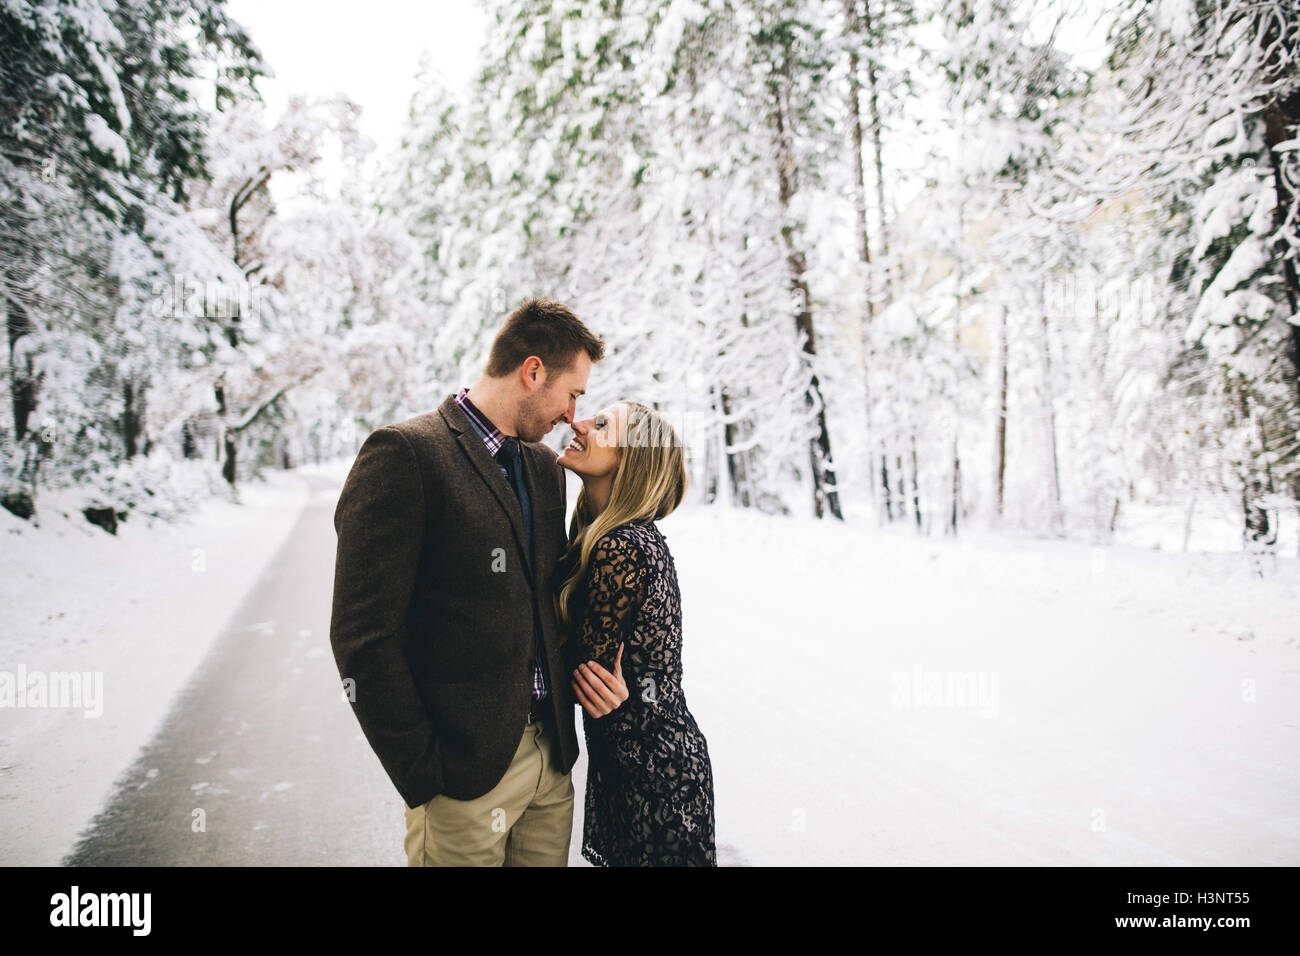 Couple in snow-covered forest face to face smiling Stock Photo